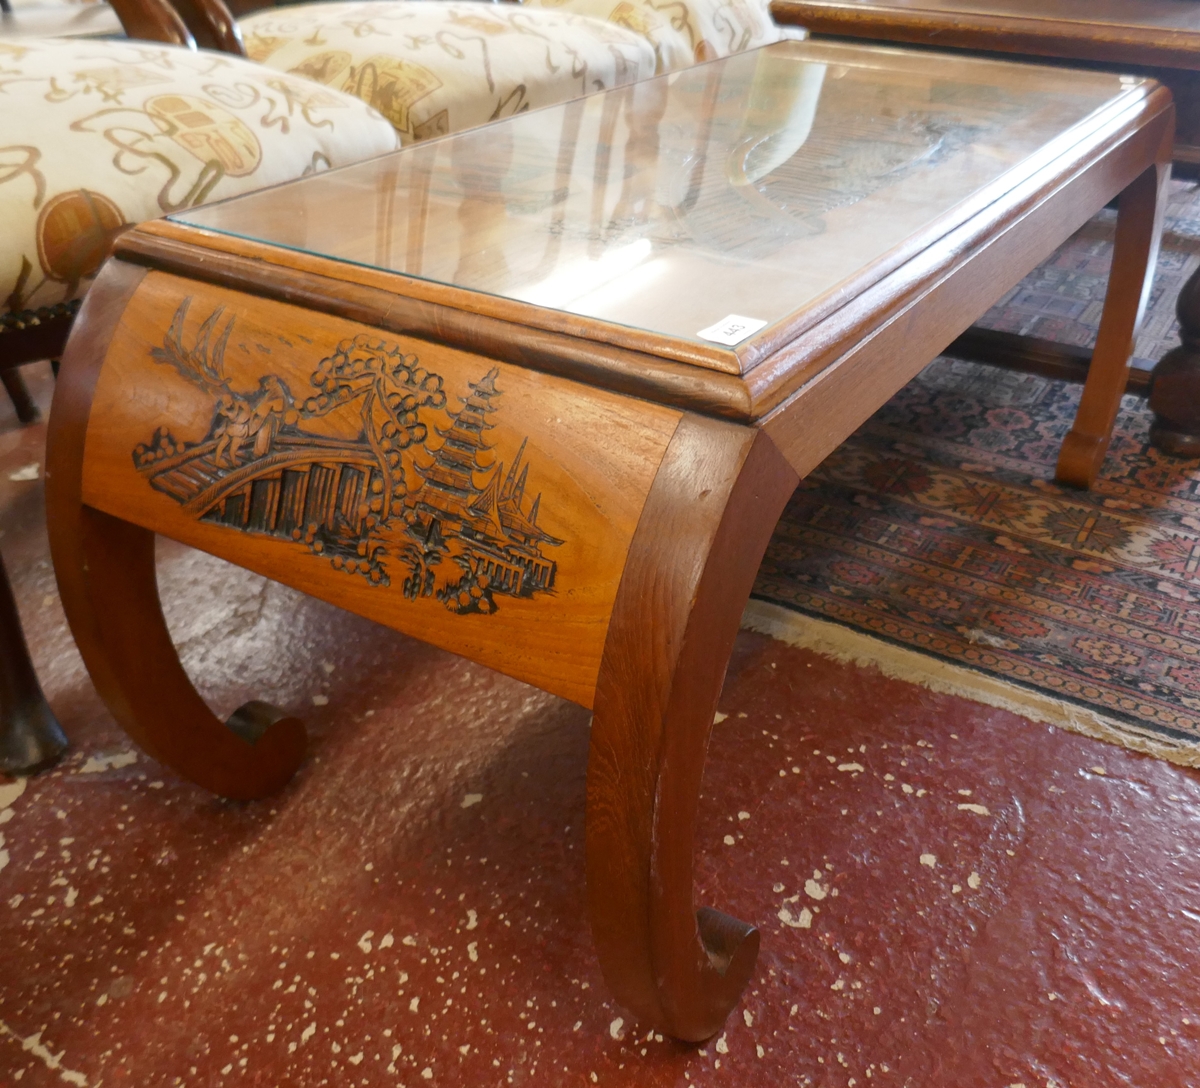 Glass topped Oriental coffee table - Approx size: W: 109cm D: 45cm H: 46cm - Image 3 of 3